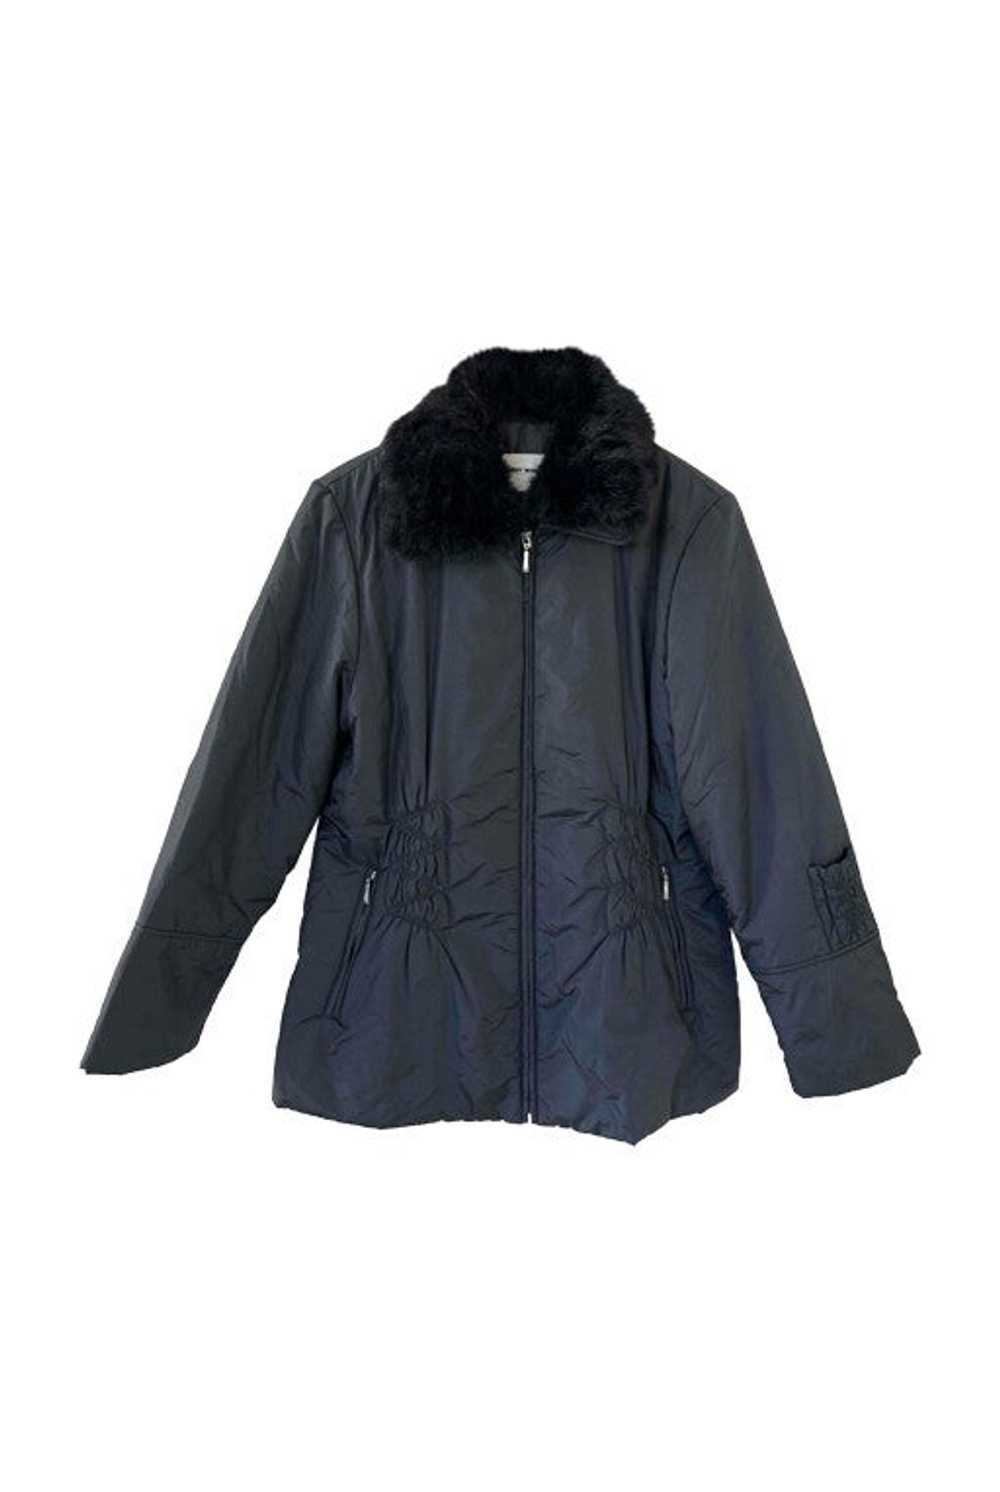 Fitted down jacket - Vintage Gerry Weber fitted d… - image 1